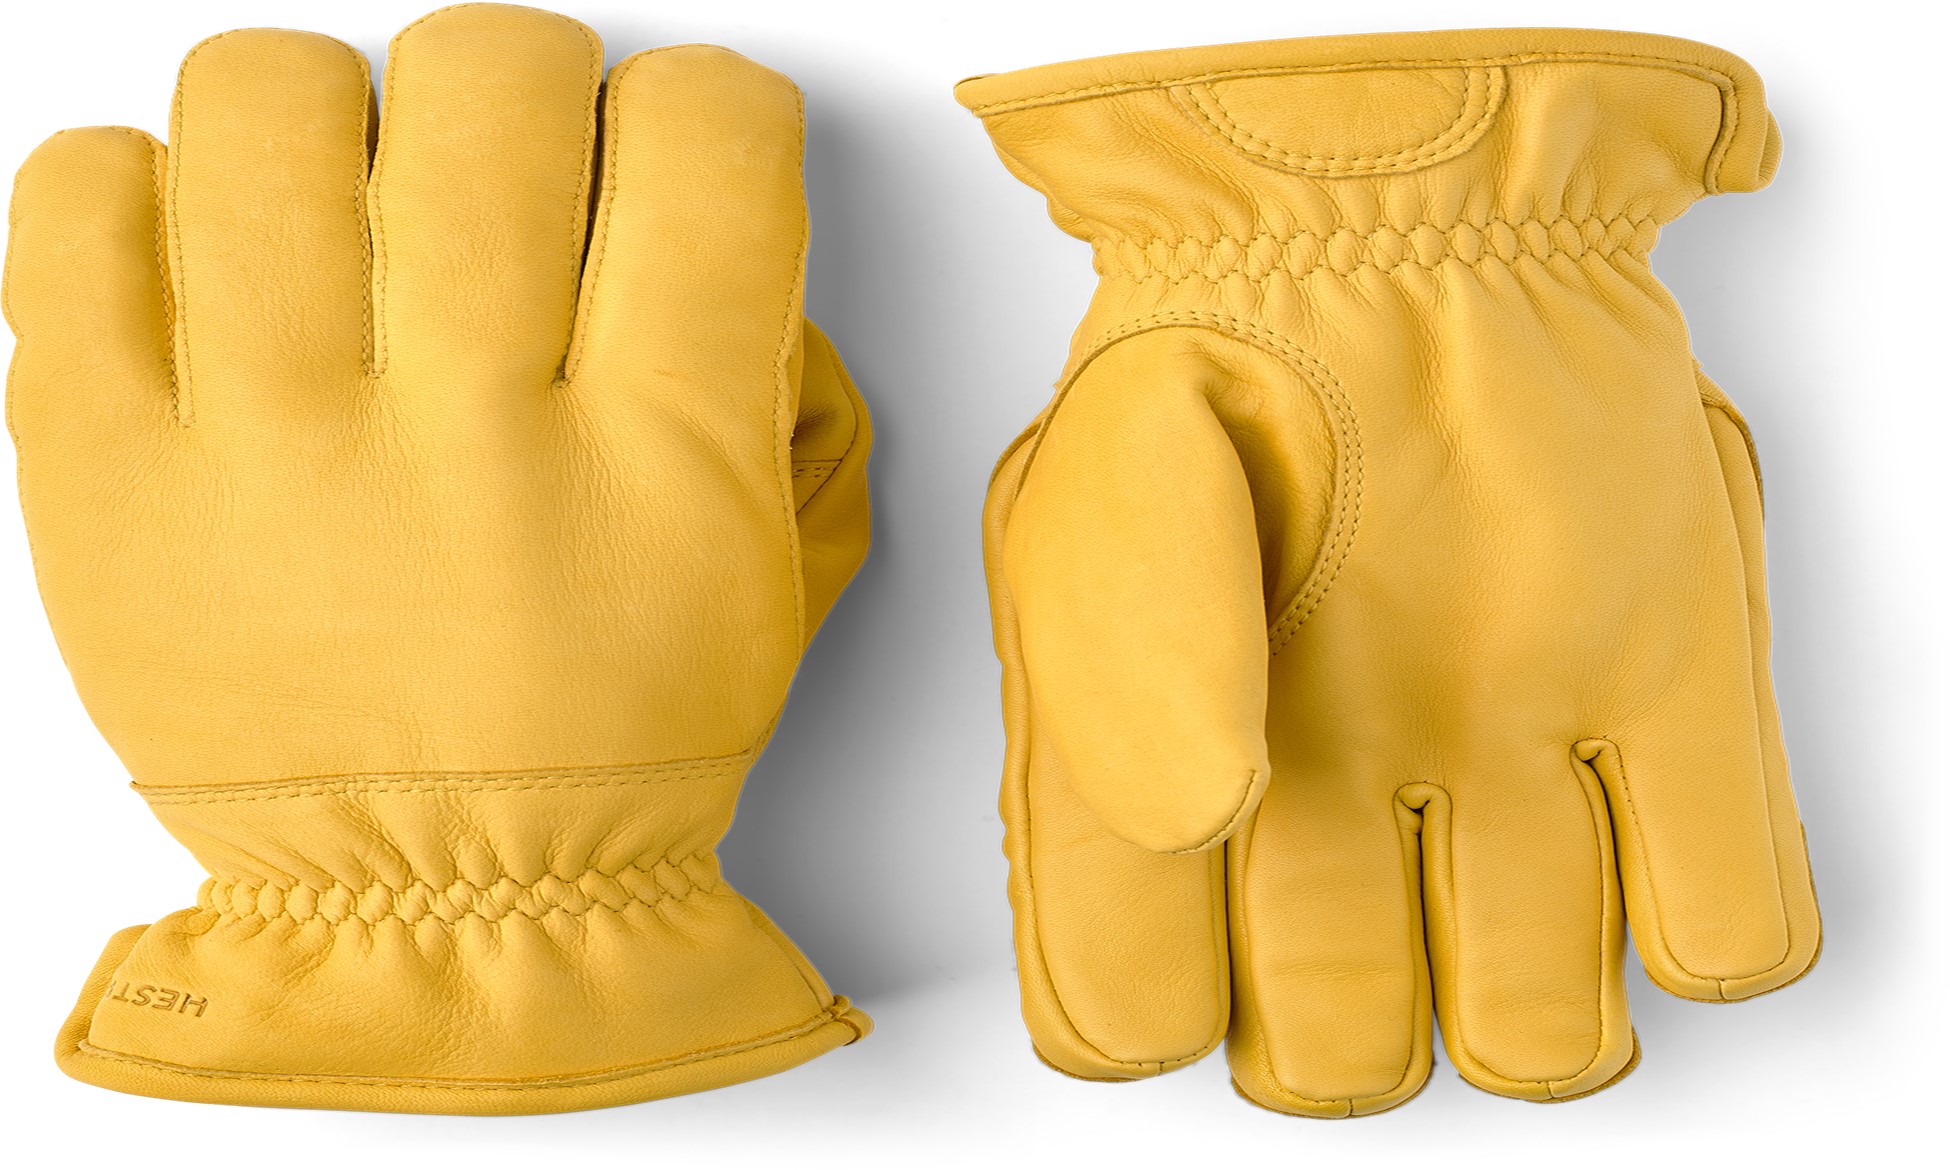 Cold weather glove: full leather